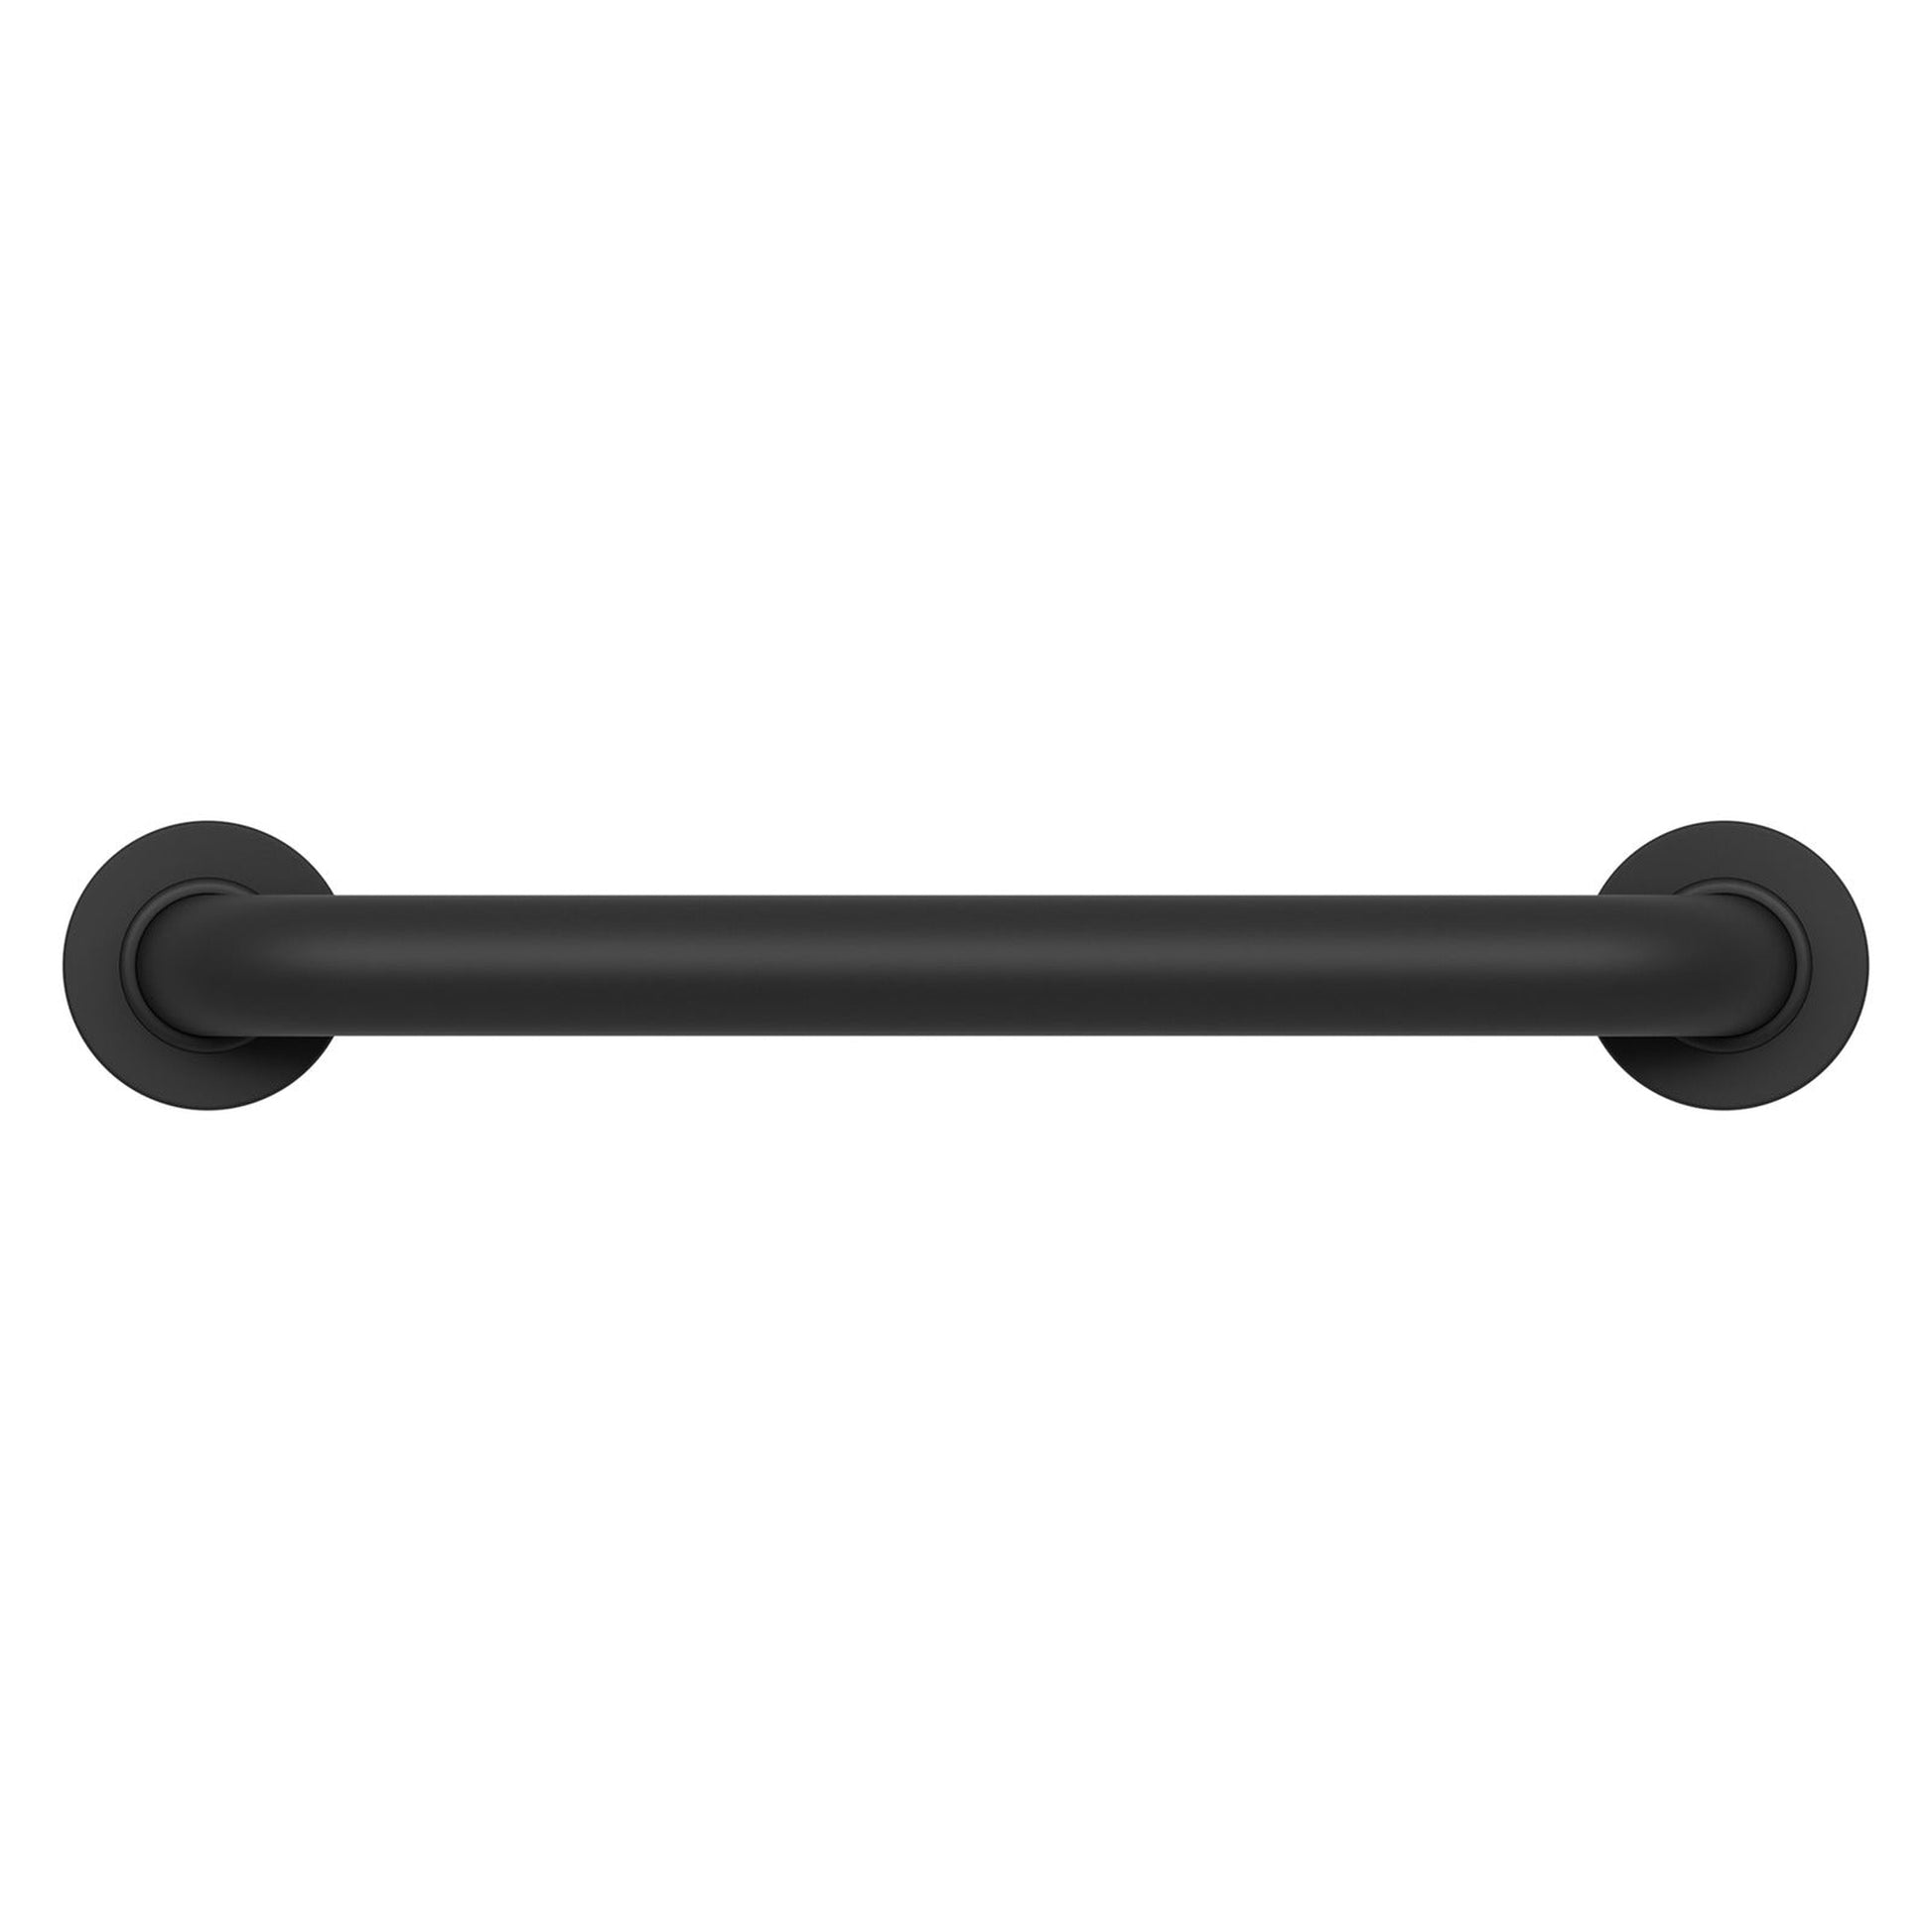 Evekare 16" x 1.5" Stainless Steel Concealed Mount Grab Bar With Comfort Grip Coating in Matte Black